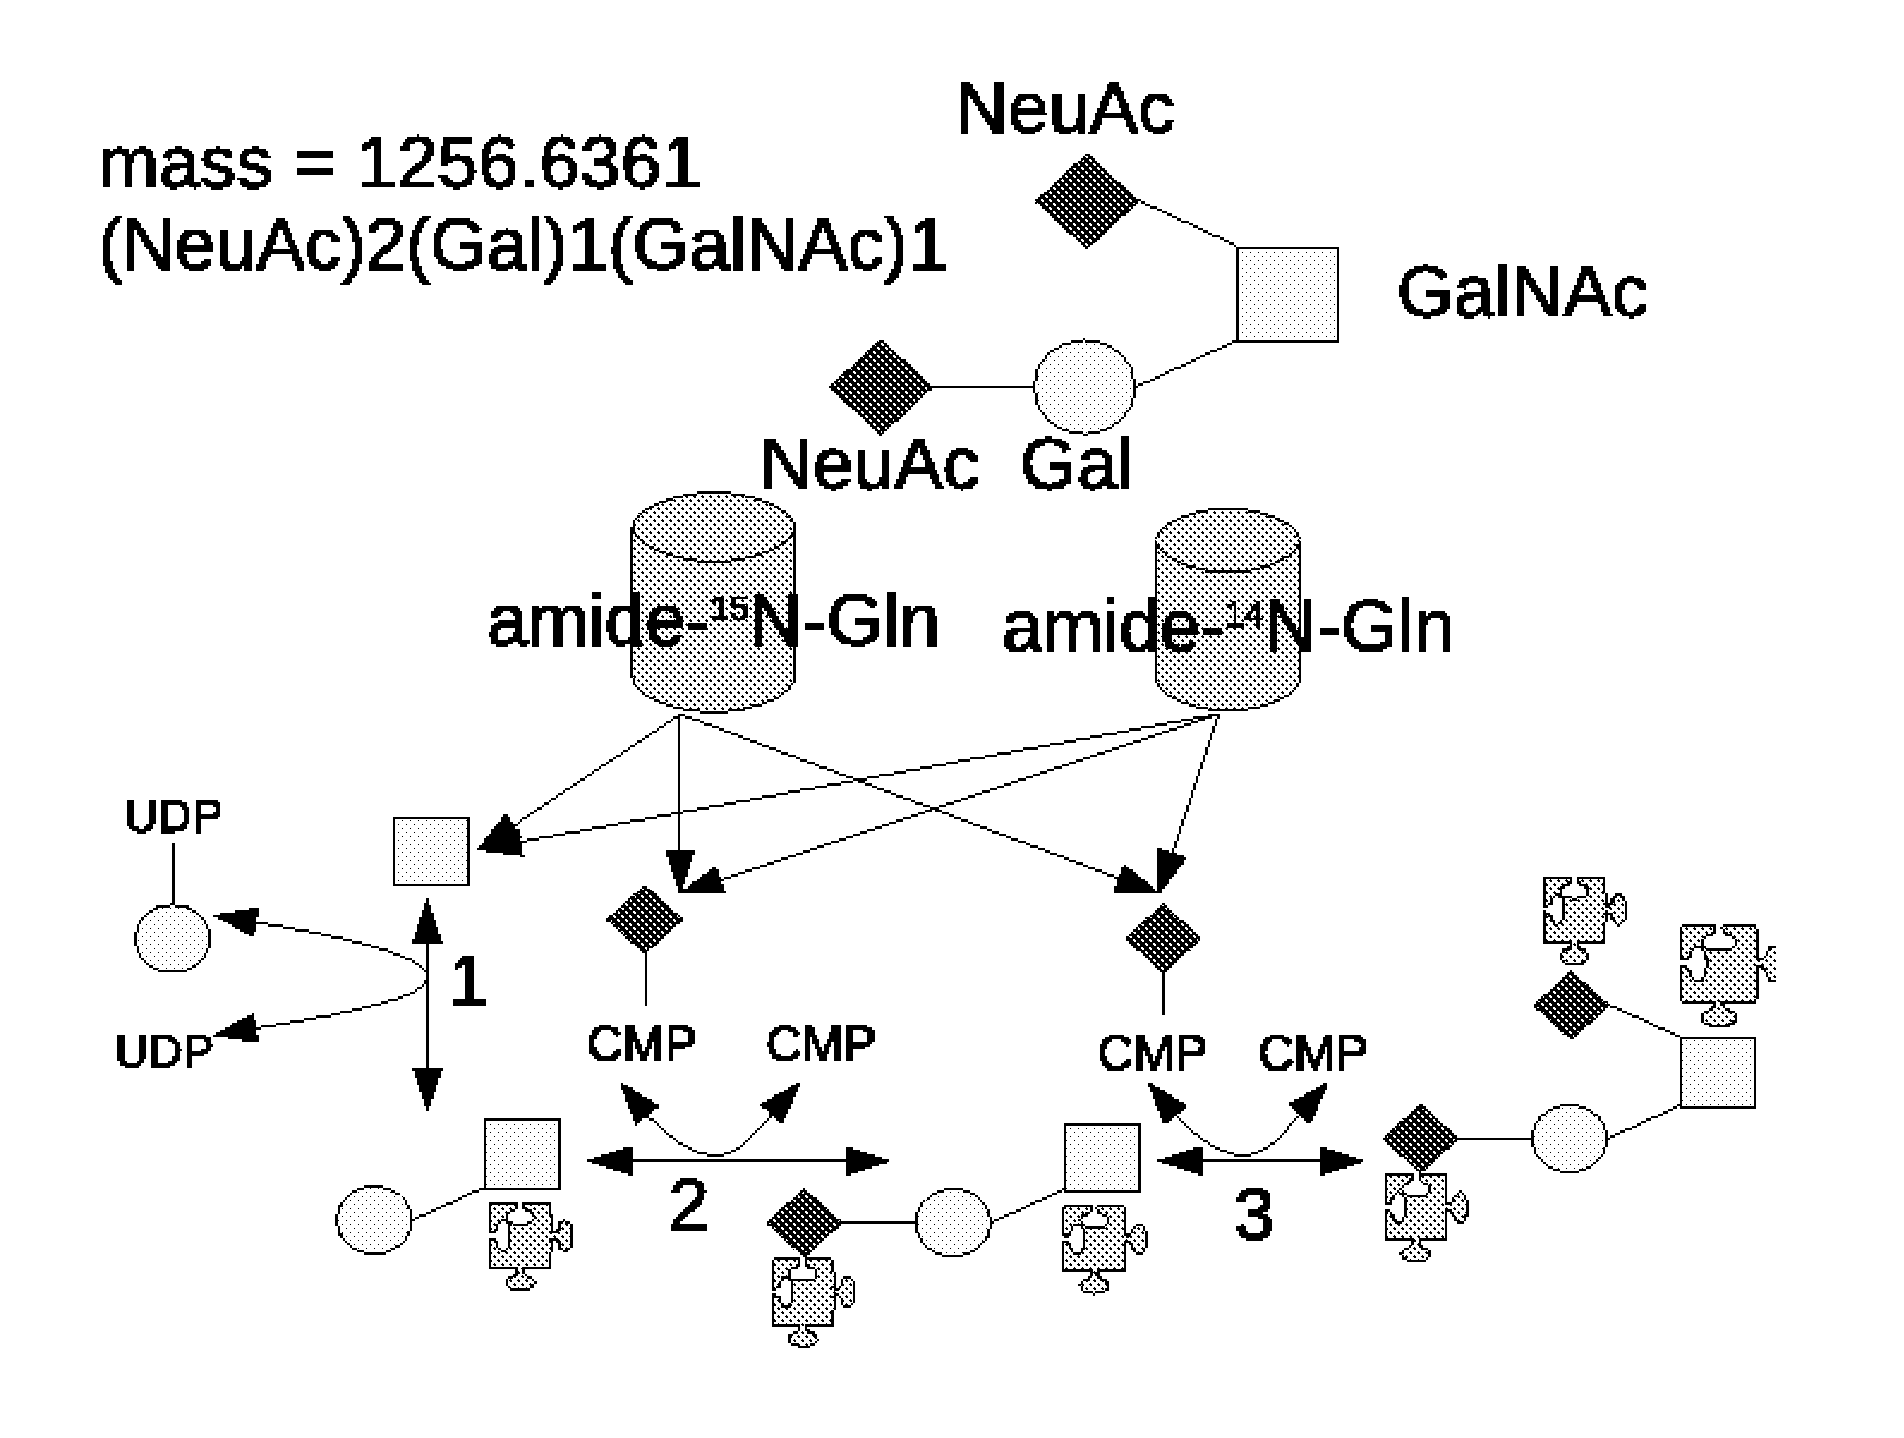 Method And System Using Computer Simulation For The Quantitative Analysis Of Glycan Biosynthesis